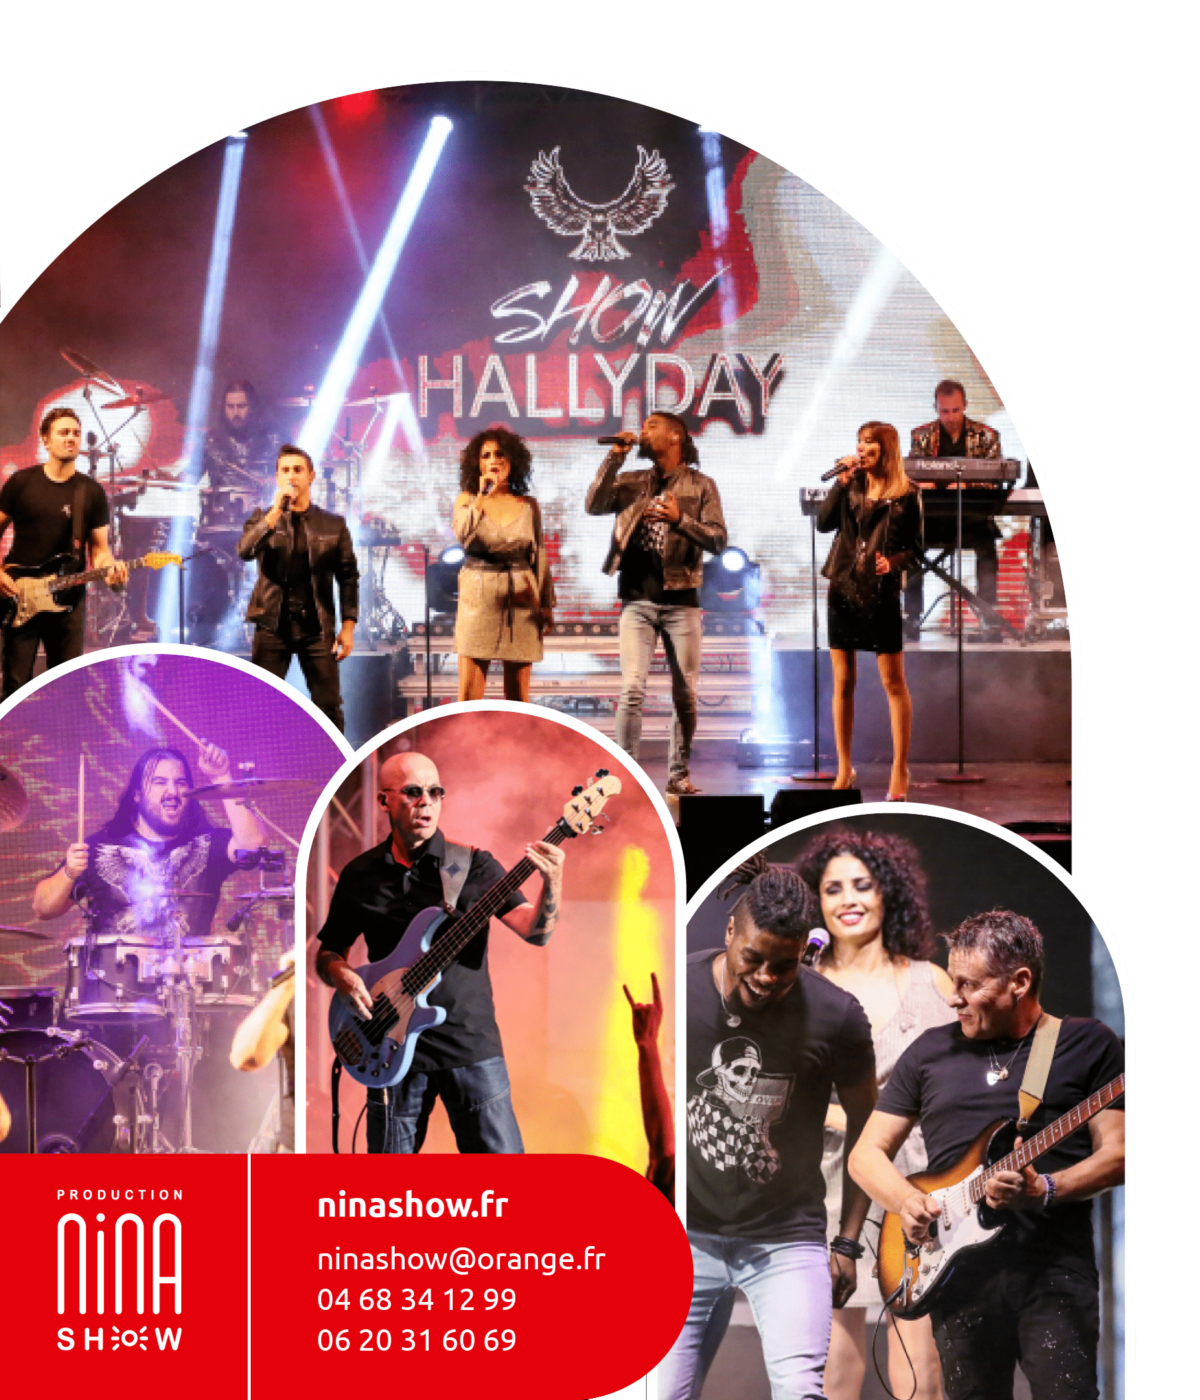 Show Hallyday - Concert hommage tribute